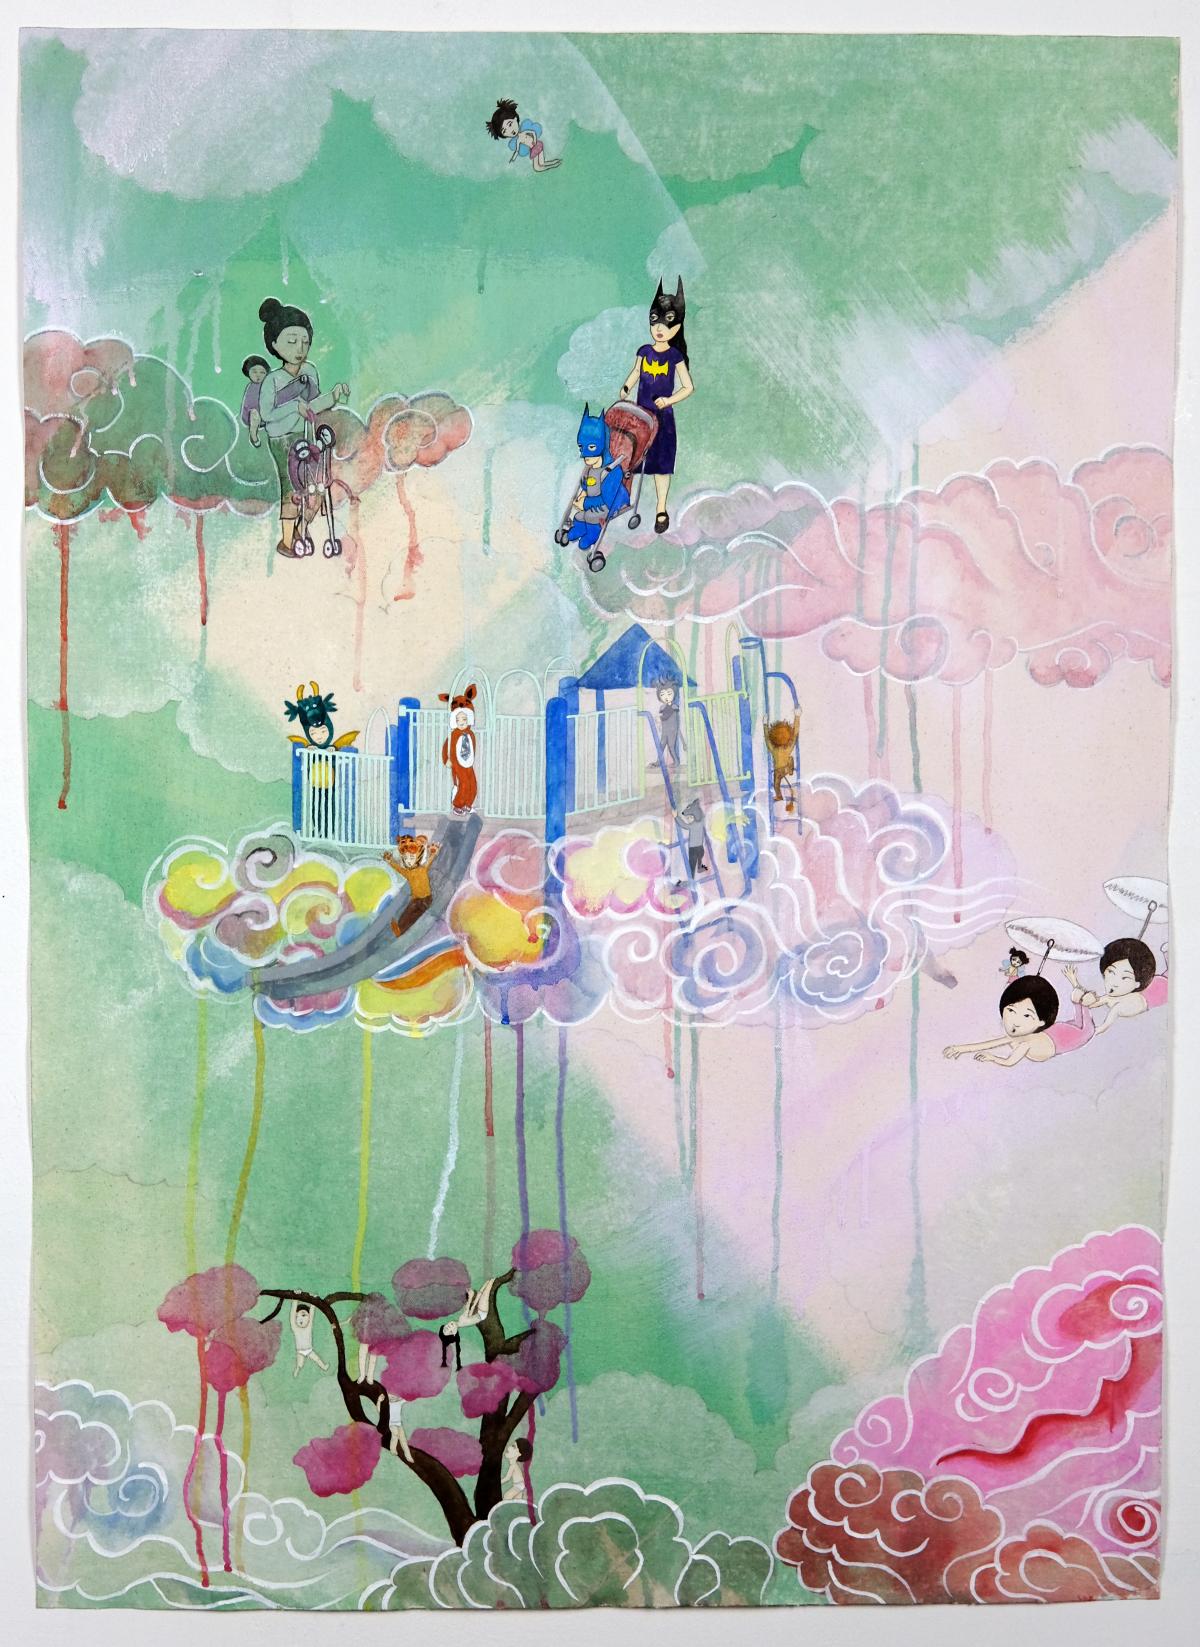 Artwork by Kyung Jeon titled Urban Jungle Gym Storm Clouds, 2019, Gouache, watercolor, graphite, acrylic on Hanji paper on canvas